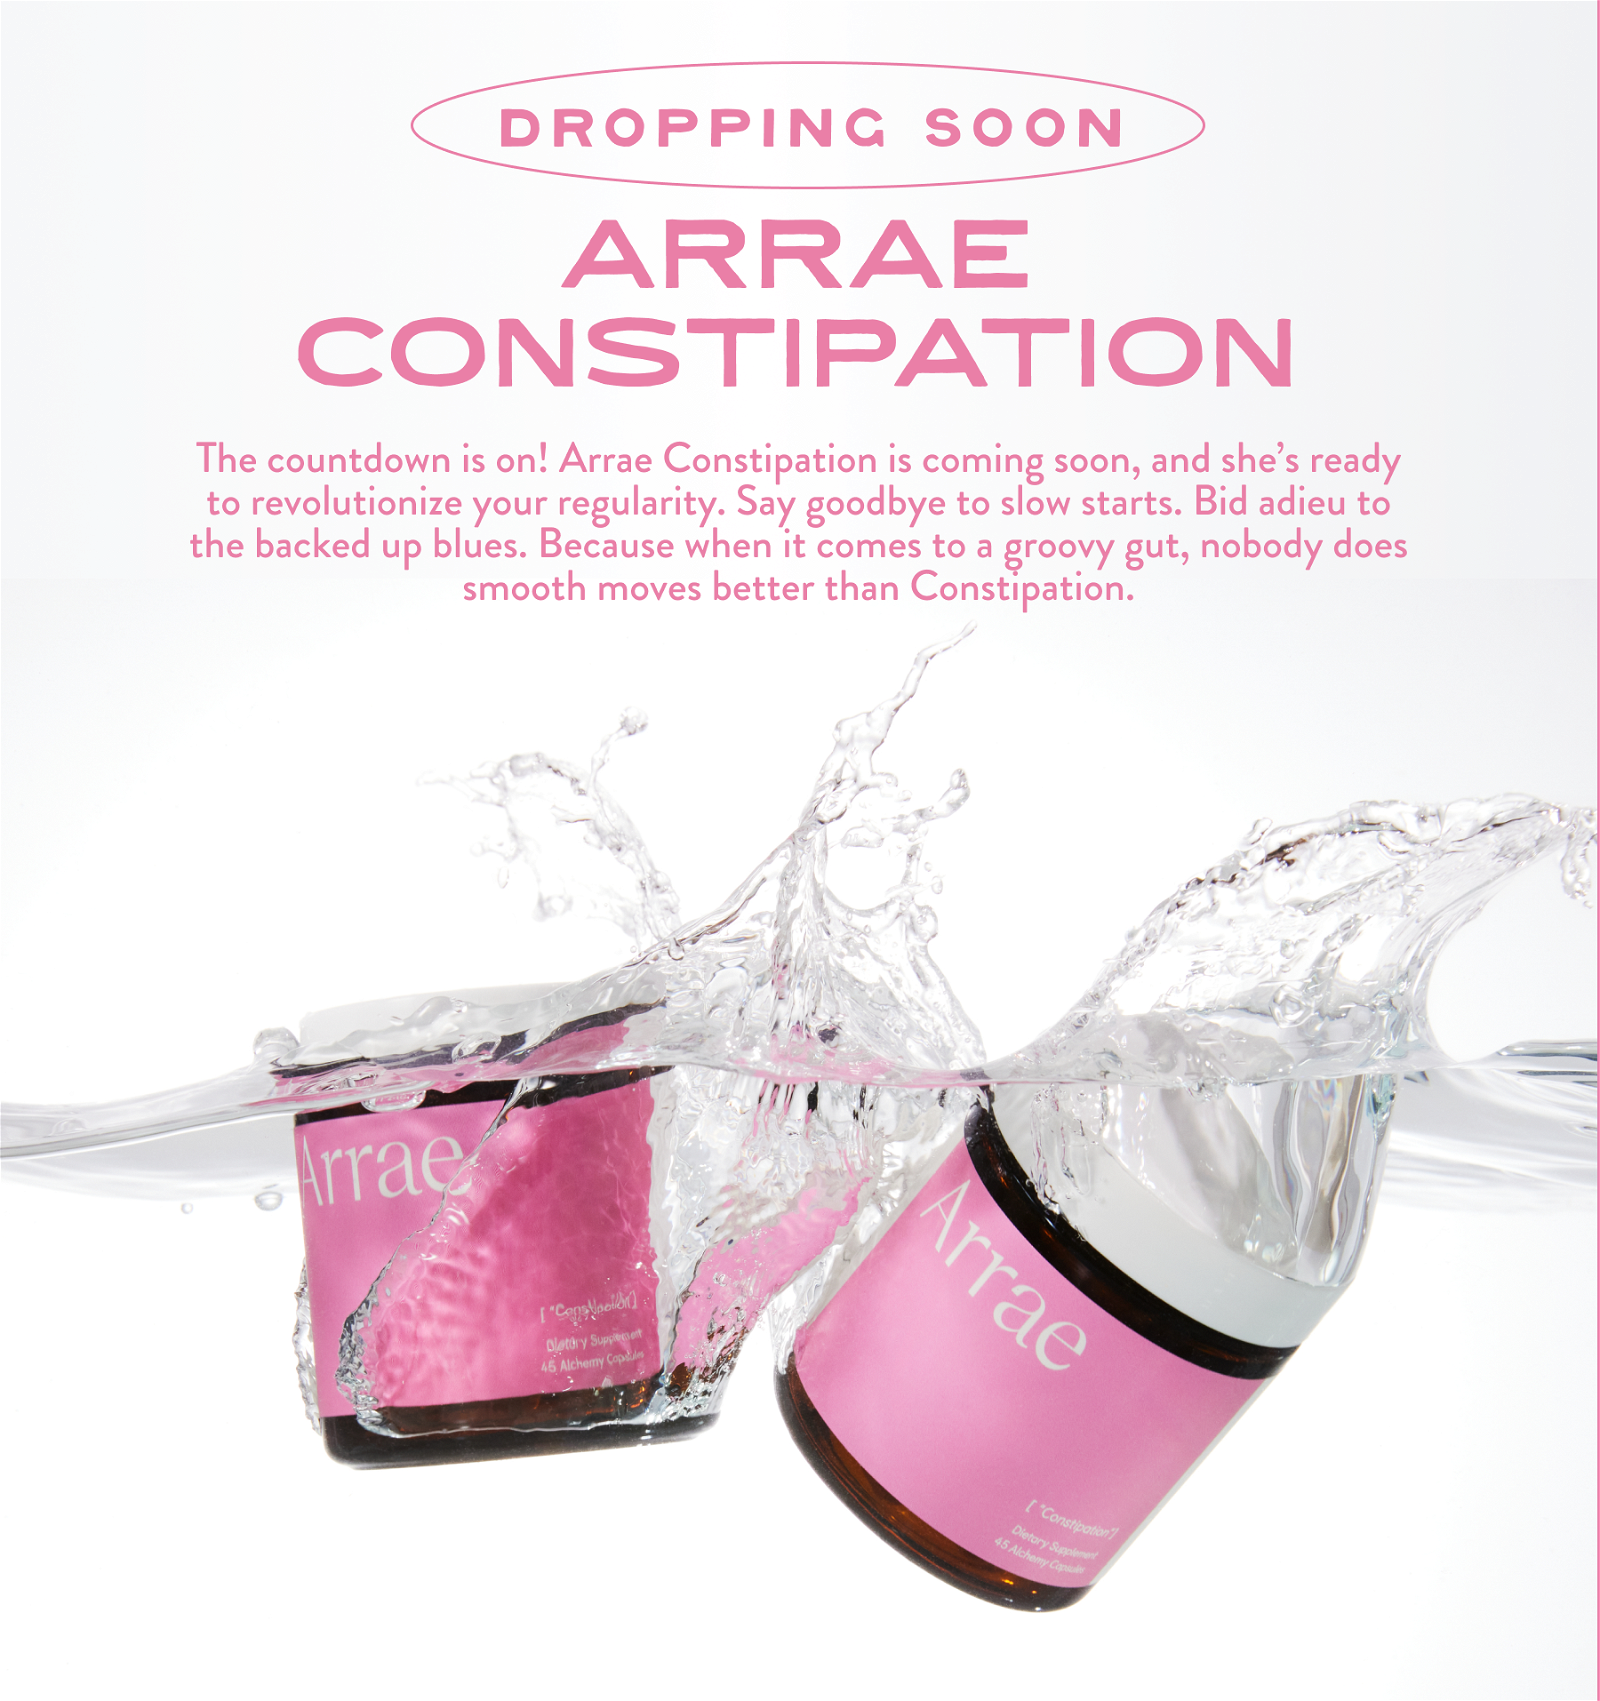 Dropping Soon. Arrae Constipation.The countdown is on! Arrae Constipation is coming soon, and she’s ready to revolutionize your regularity. Say goodbye to slow starts. Bid adieu to the backed up blues. Because when it comes to a groovy gut, nobody does smooth moves better than Constipation.